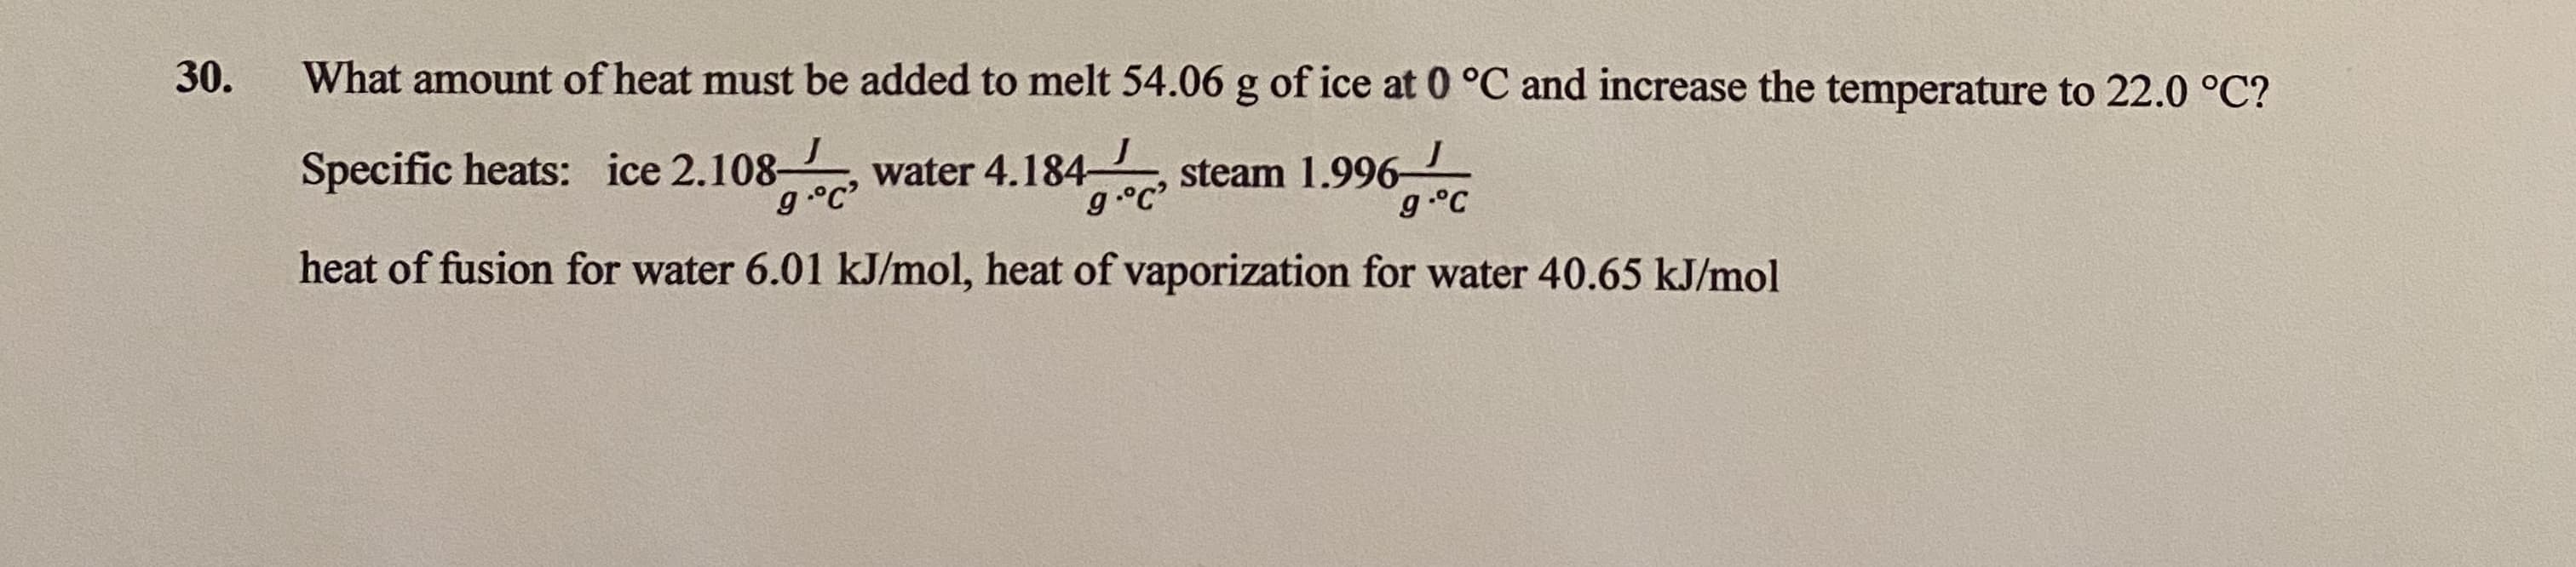 What amount of heat must be added to melt 54.06 g of ice at 0 °C and increase the temperature to 22.0 °C?
Specific heats: ice 2.108 , water 4.184-
g.°C
steam 1.996
g°C
heat of fusion for water 6.01 kJ/mol, heat of vaporization for water 40.65 kJ/mol
